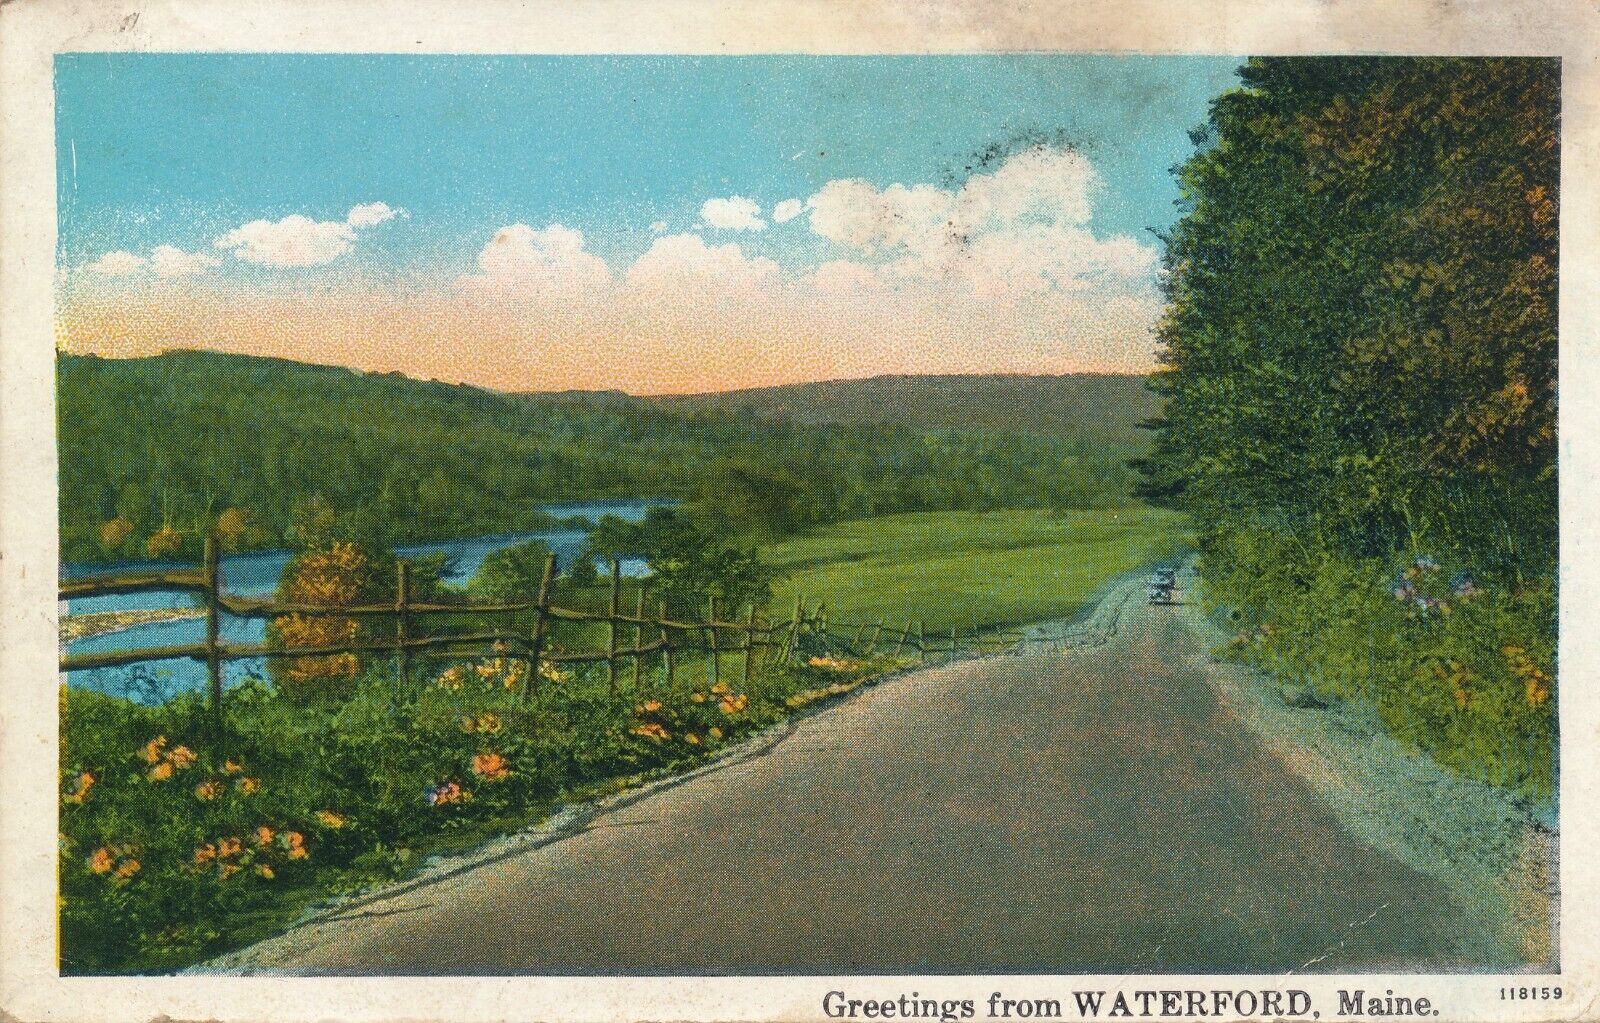 Greetings from Waterford, Maine 1929 posted postcard